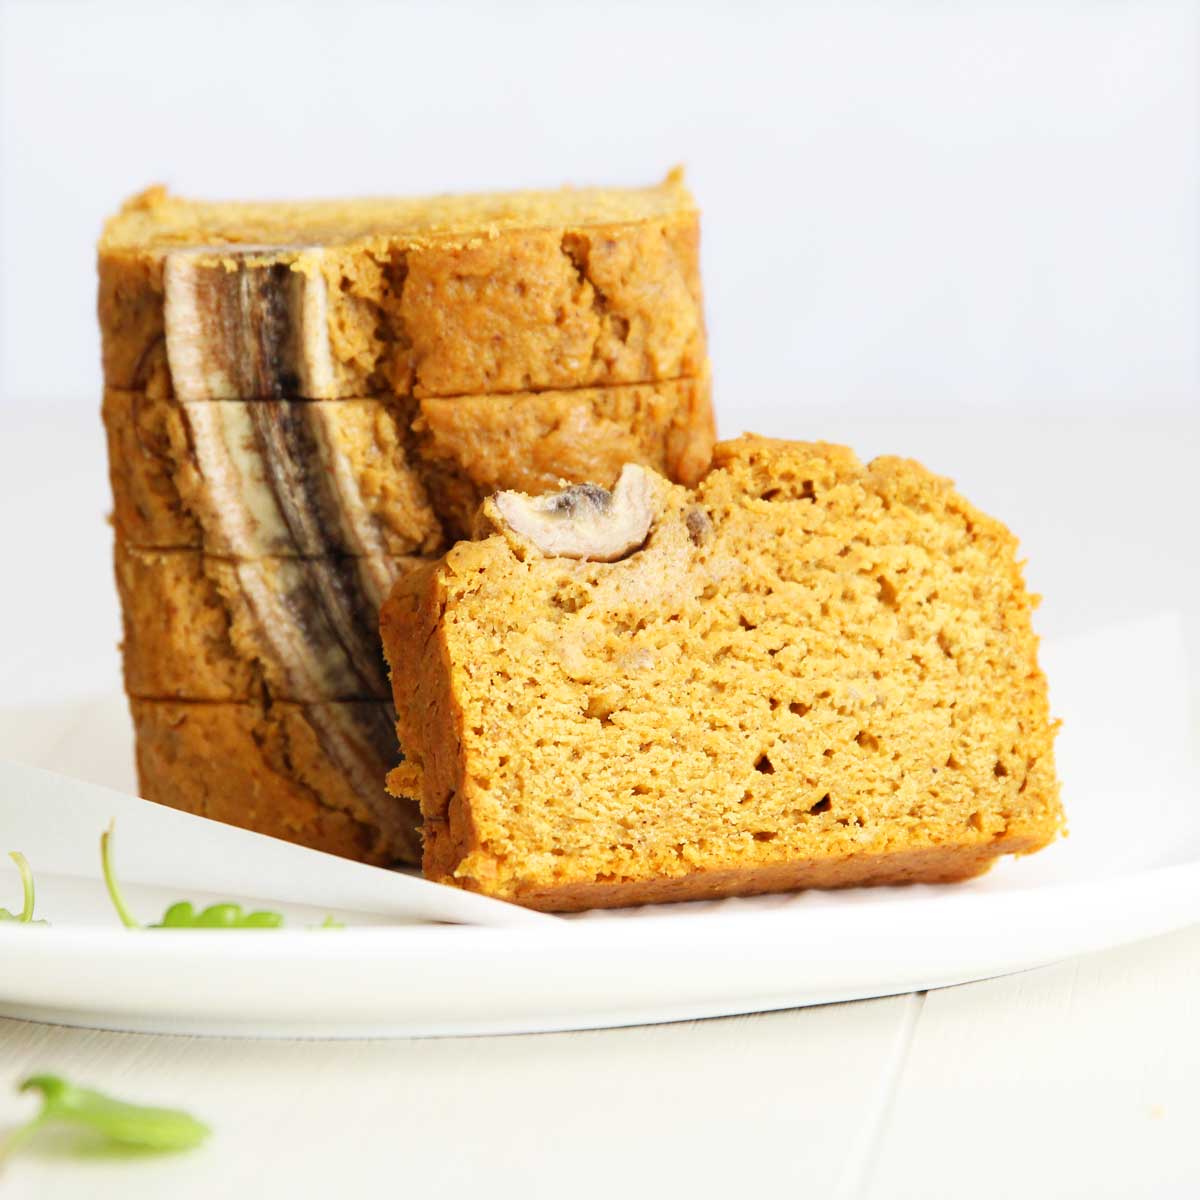 Super Moist Olive Oil Pumpkin Bread With Banana (Eggless & Dairy Free) - Brown Sugar Whipped Cream